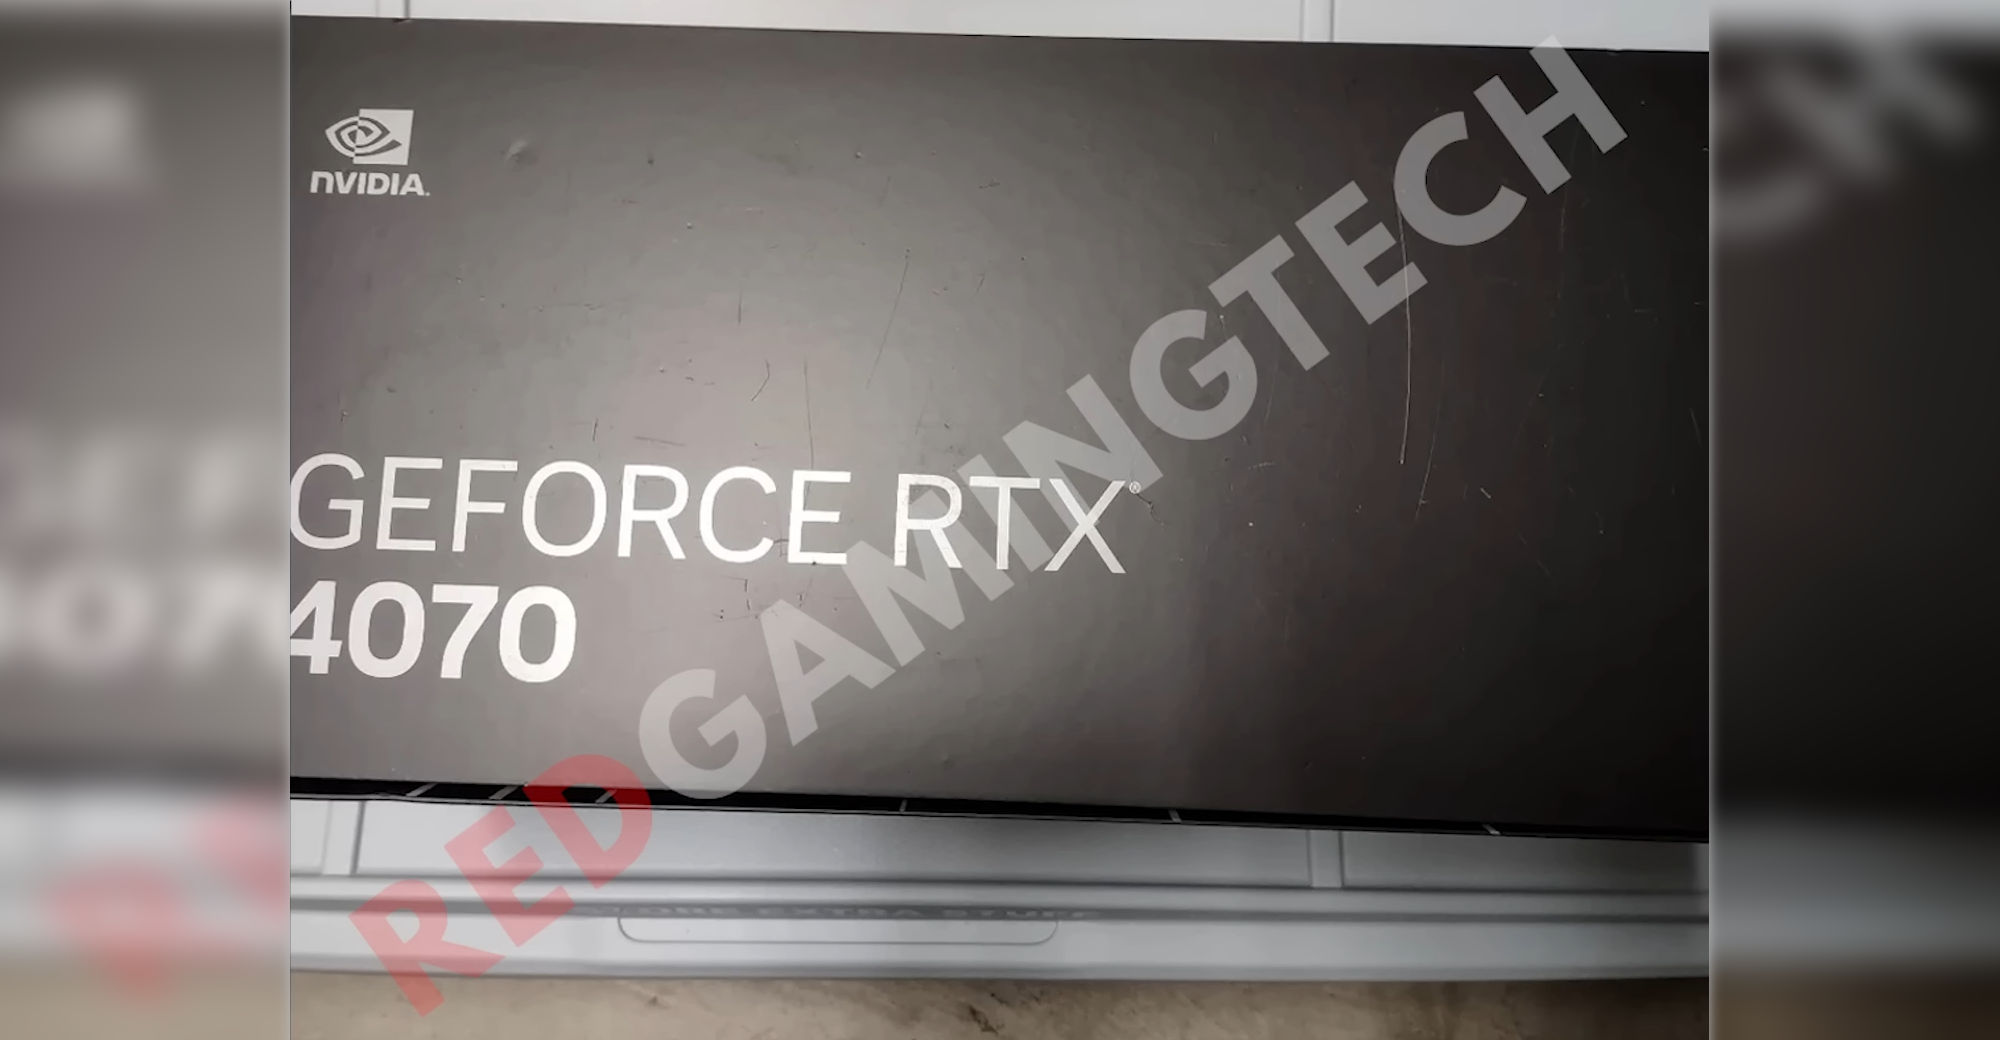 NVIDIA GeForce RTX 4070 Founders Edition packaging leaks